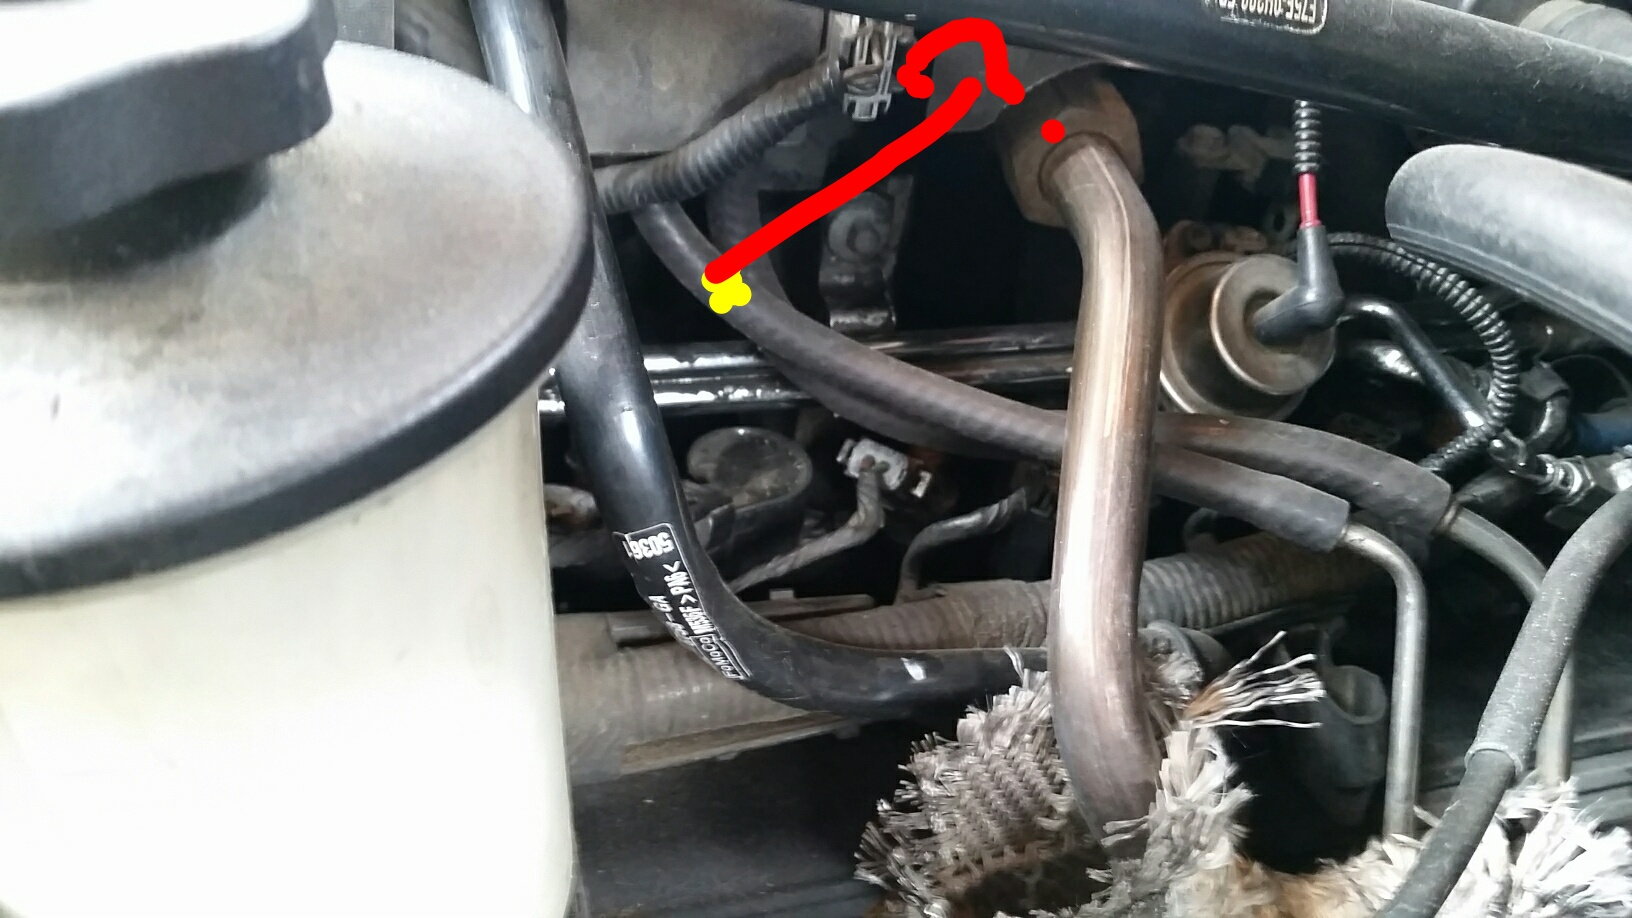 Which hose is this, please? So I can order the correct replacement part ...